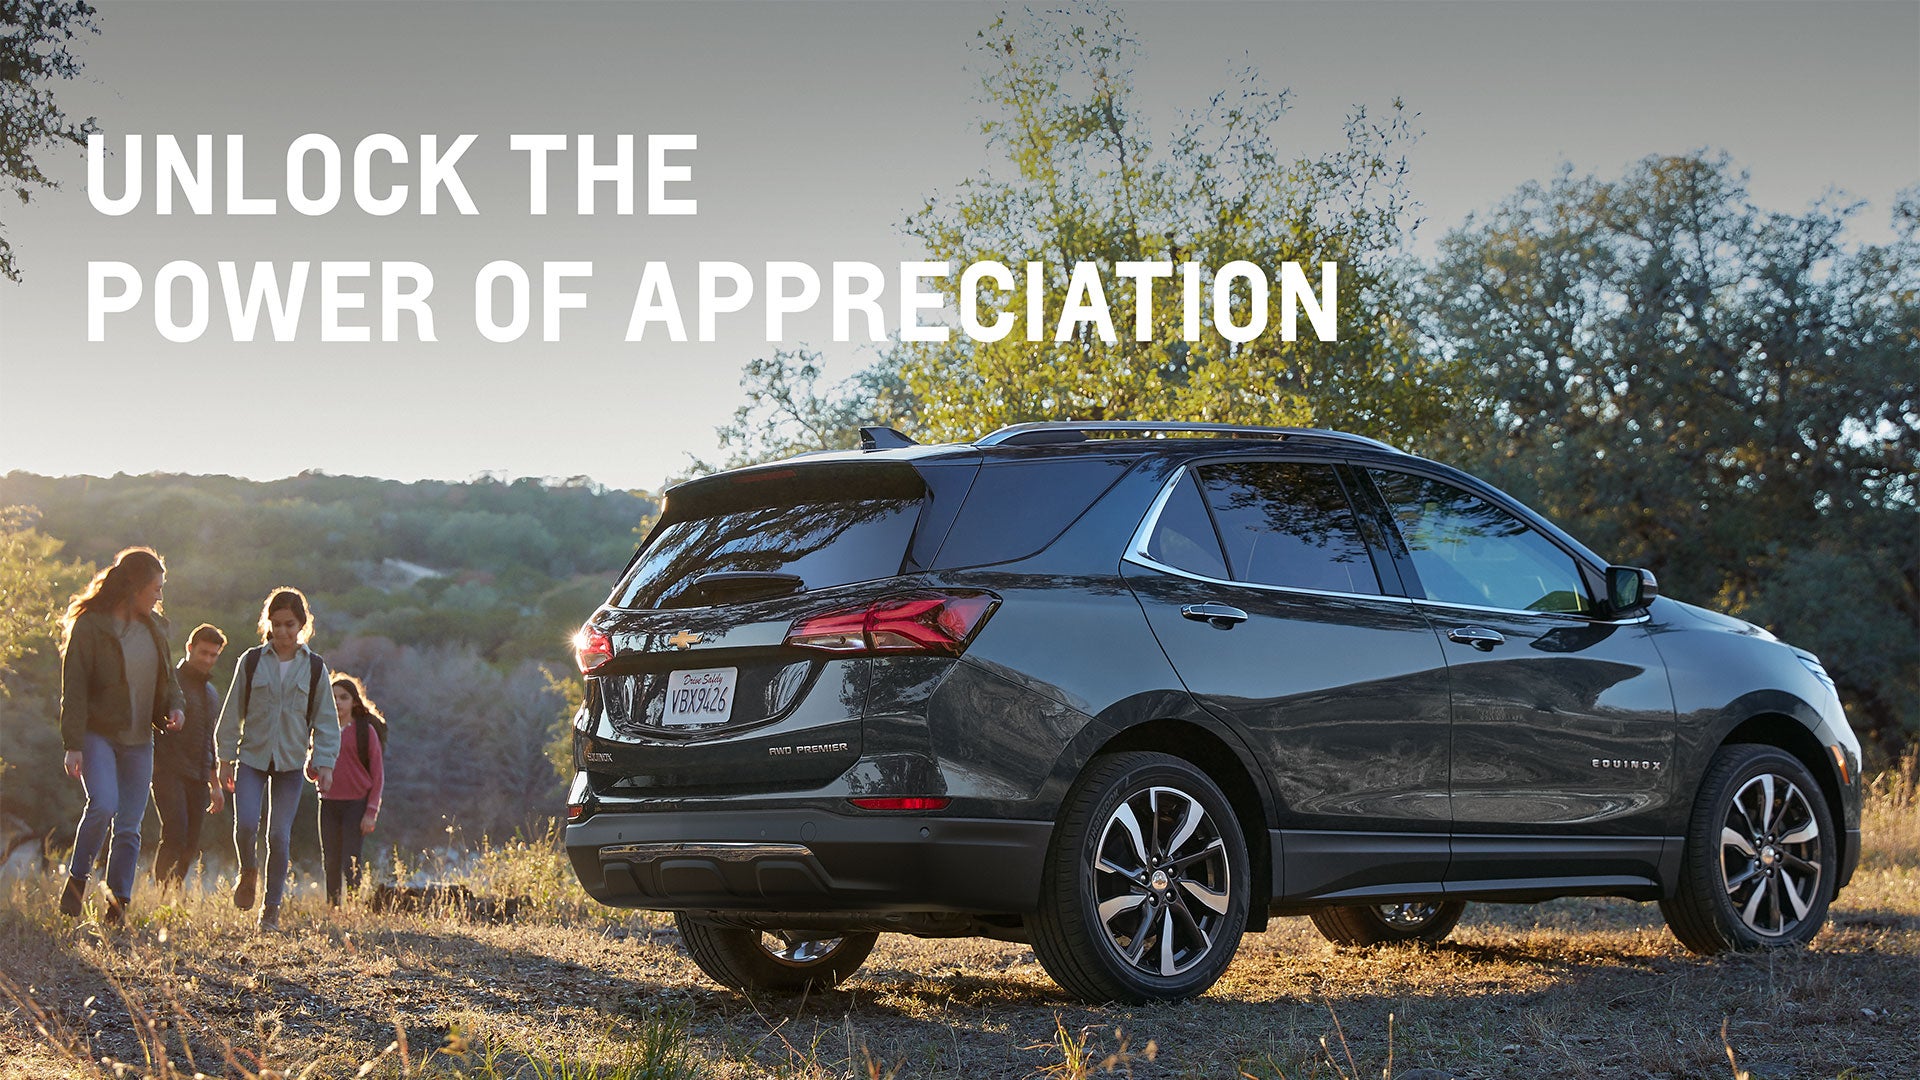 Unlock the power of appreciation | Clay Maxey Chevrolet in Mountain Home AR